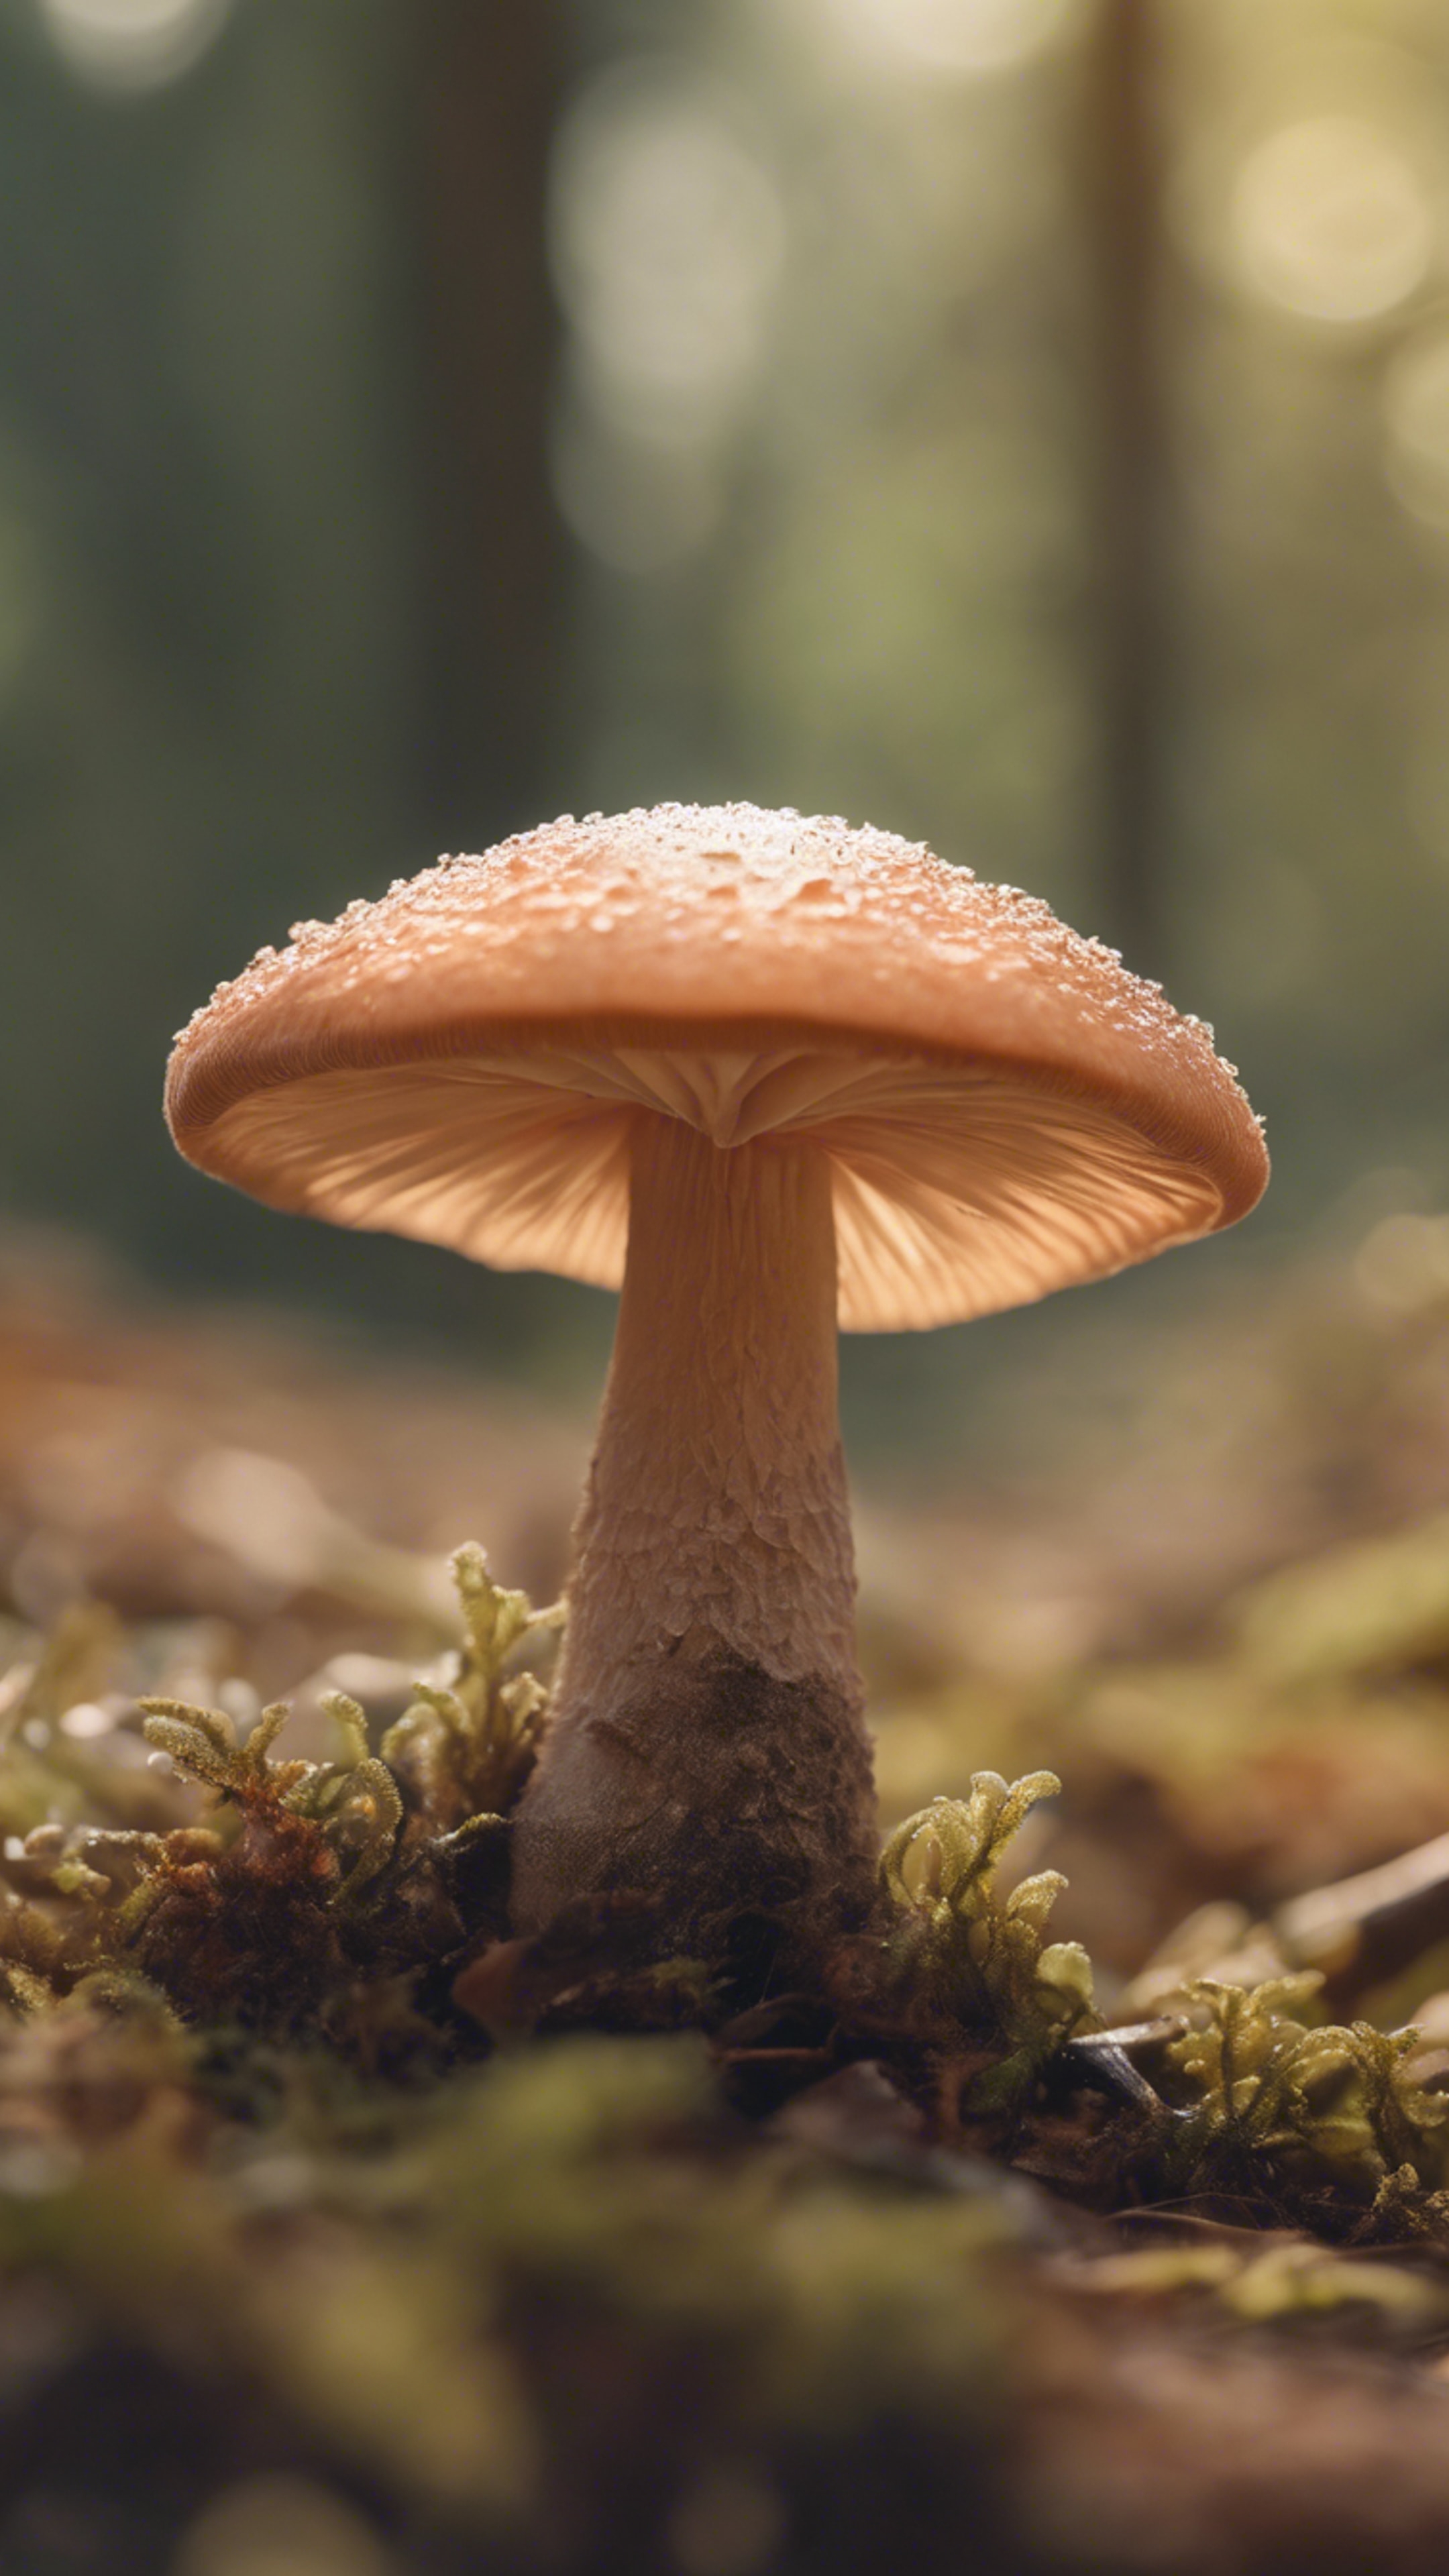 A close-up of a small, cute mushroom, peach color, with soft, sunlit forest scenery in the background. duvar kağıdı[125df3bad49b42d8bf38]